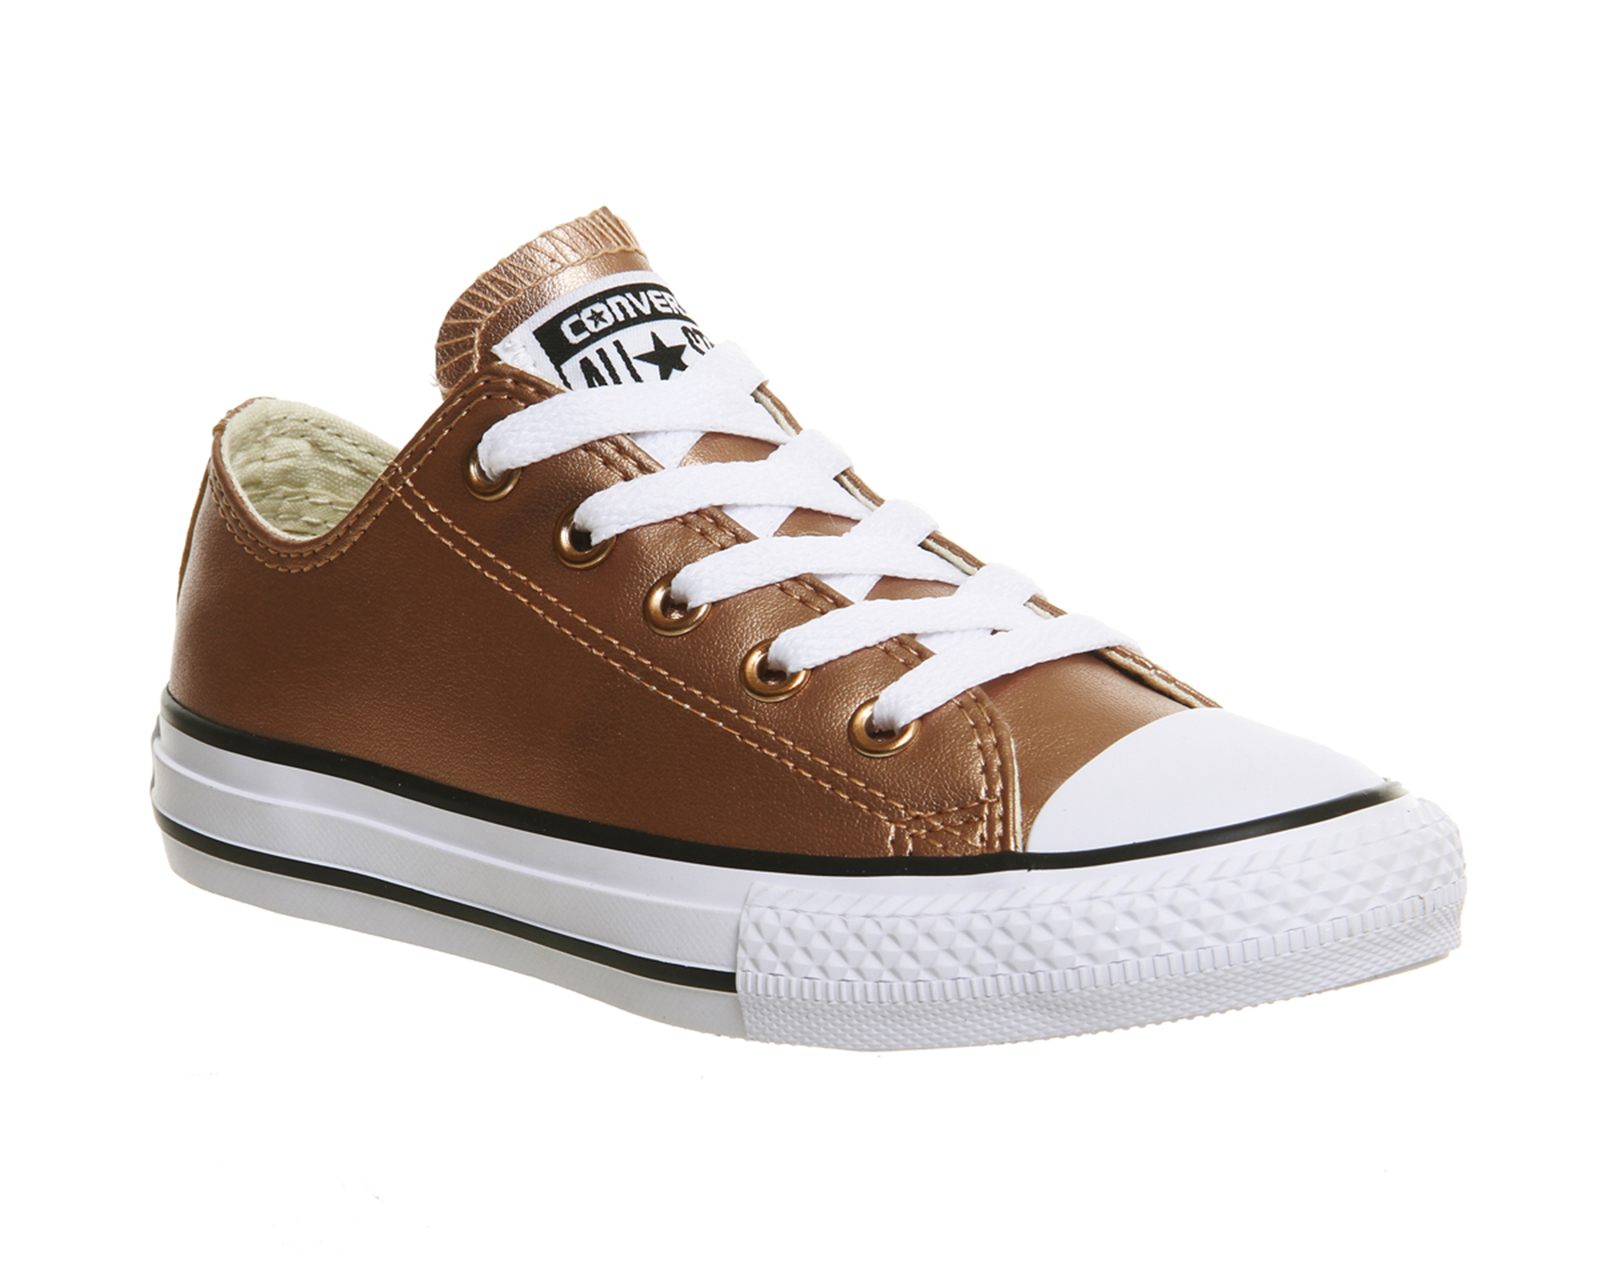 ConverseAll Star Low YouthBlush Gold